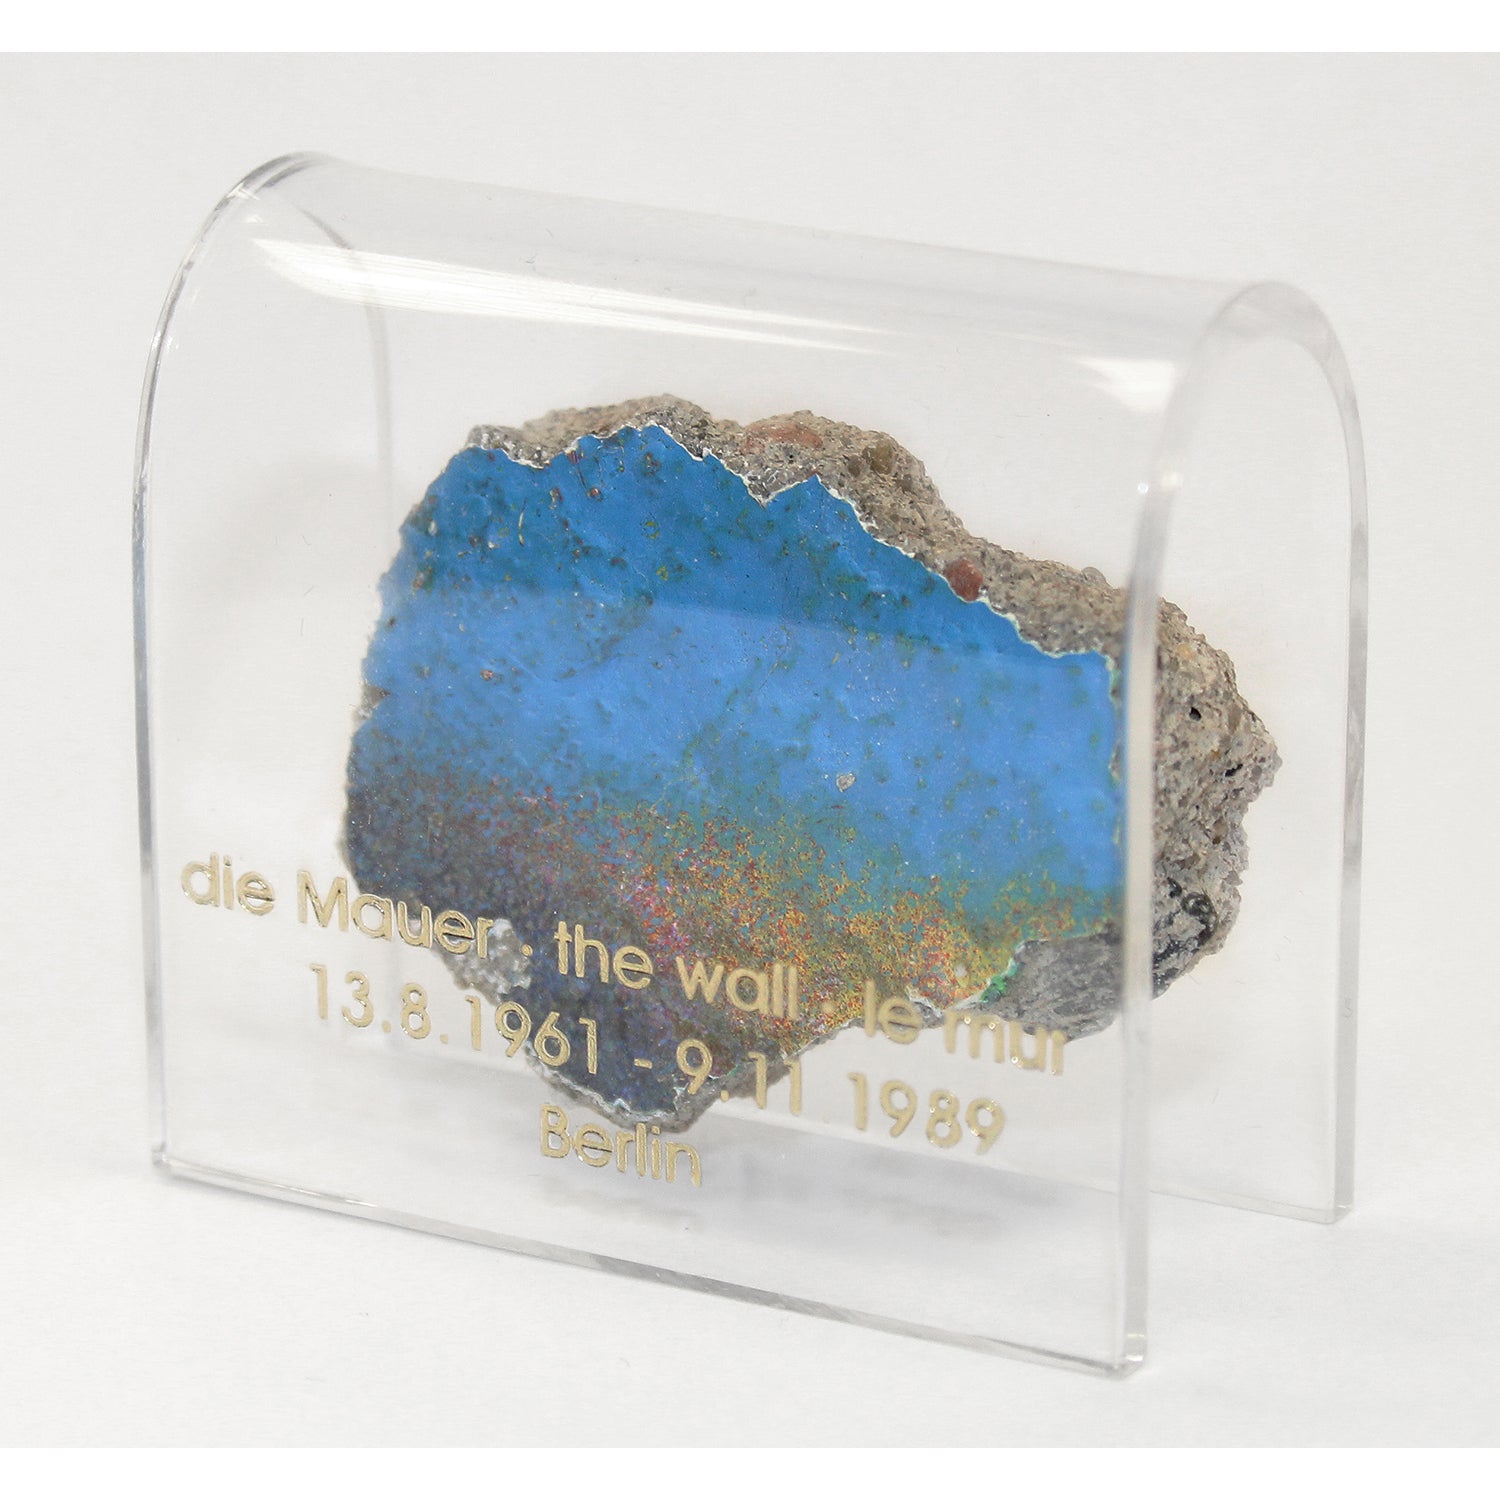 A Piece of the Berlin Wall in an Acrylic Display - Size XS